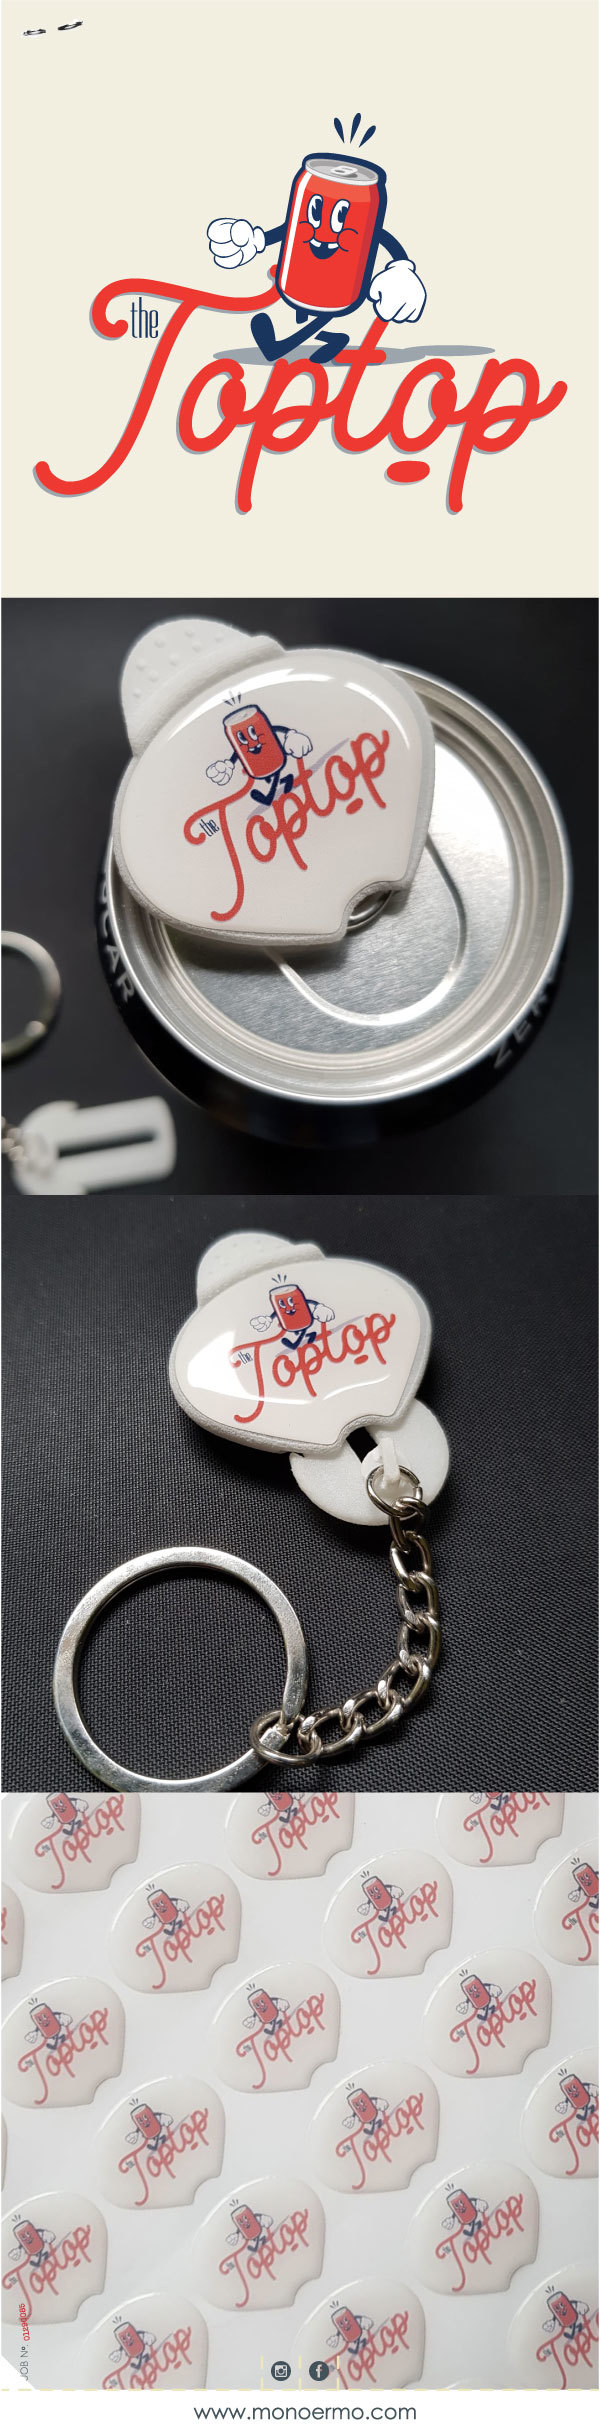 mockup The totop